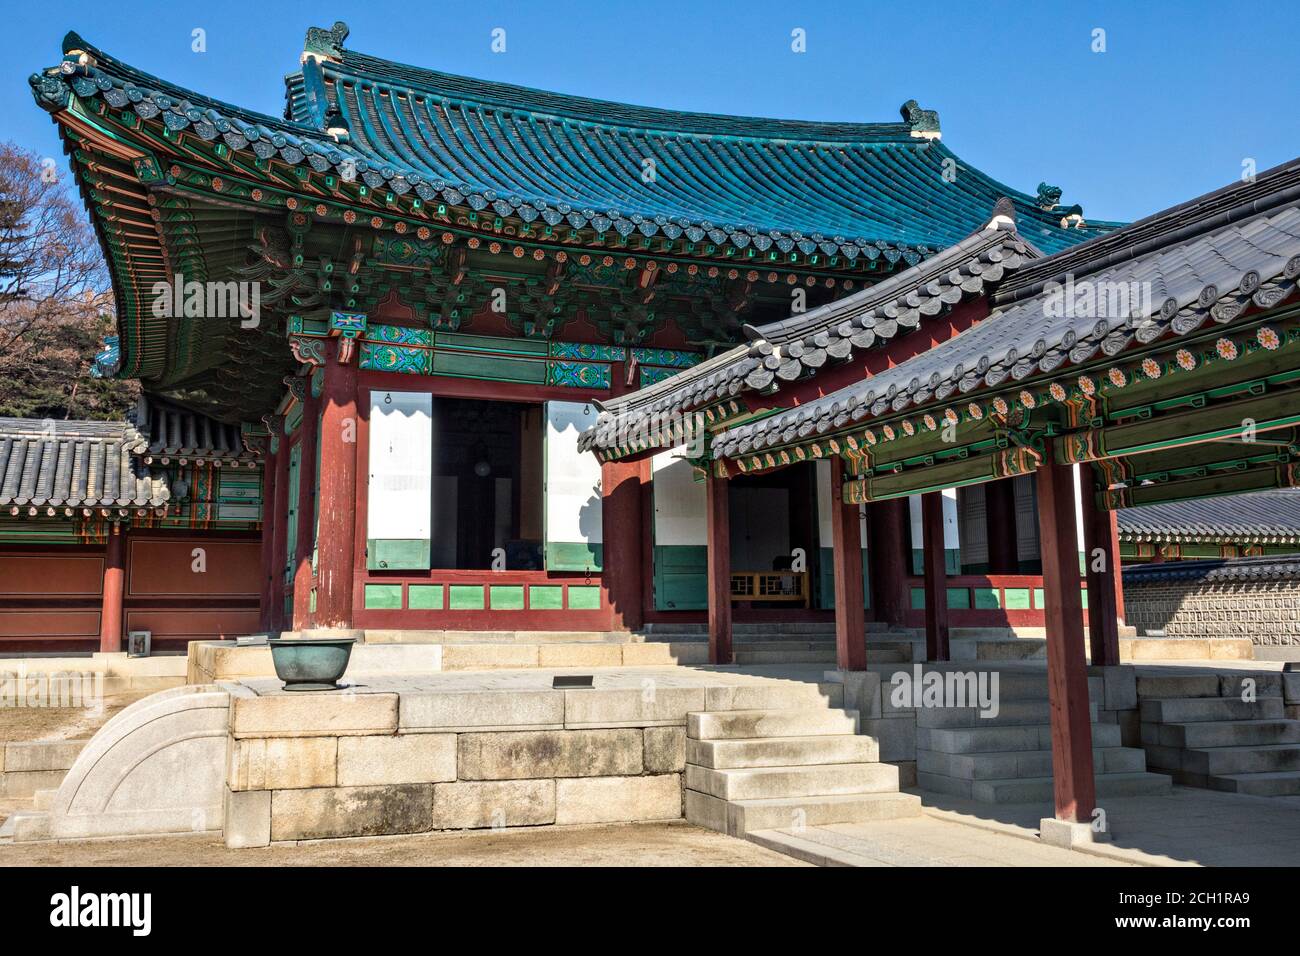 The Seonjeongjeon Hall at the Changdeokgung Palace in Seoul, South Korea. The building was the main place for the emperor to meet with high ranking officials to discuss political, state, and foreign affairs. Stock Photo